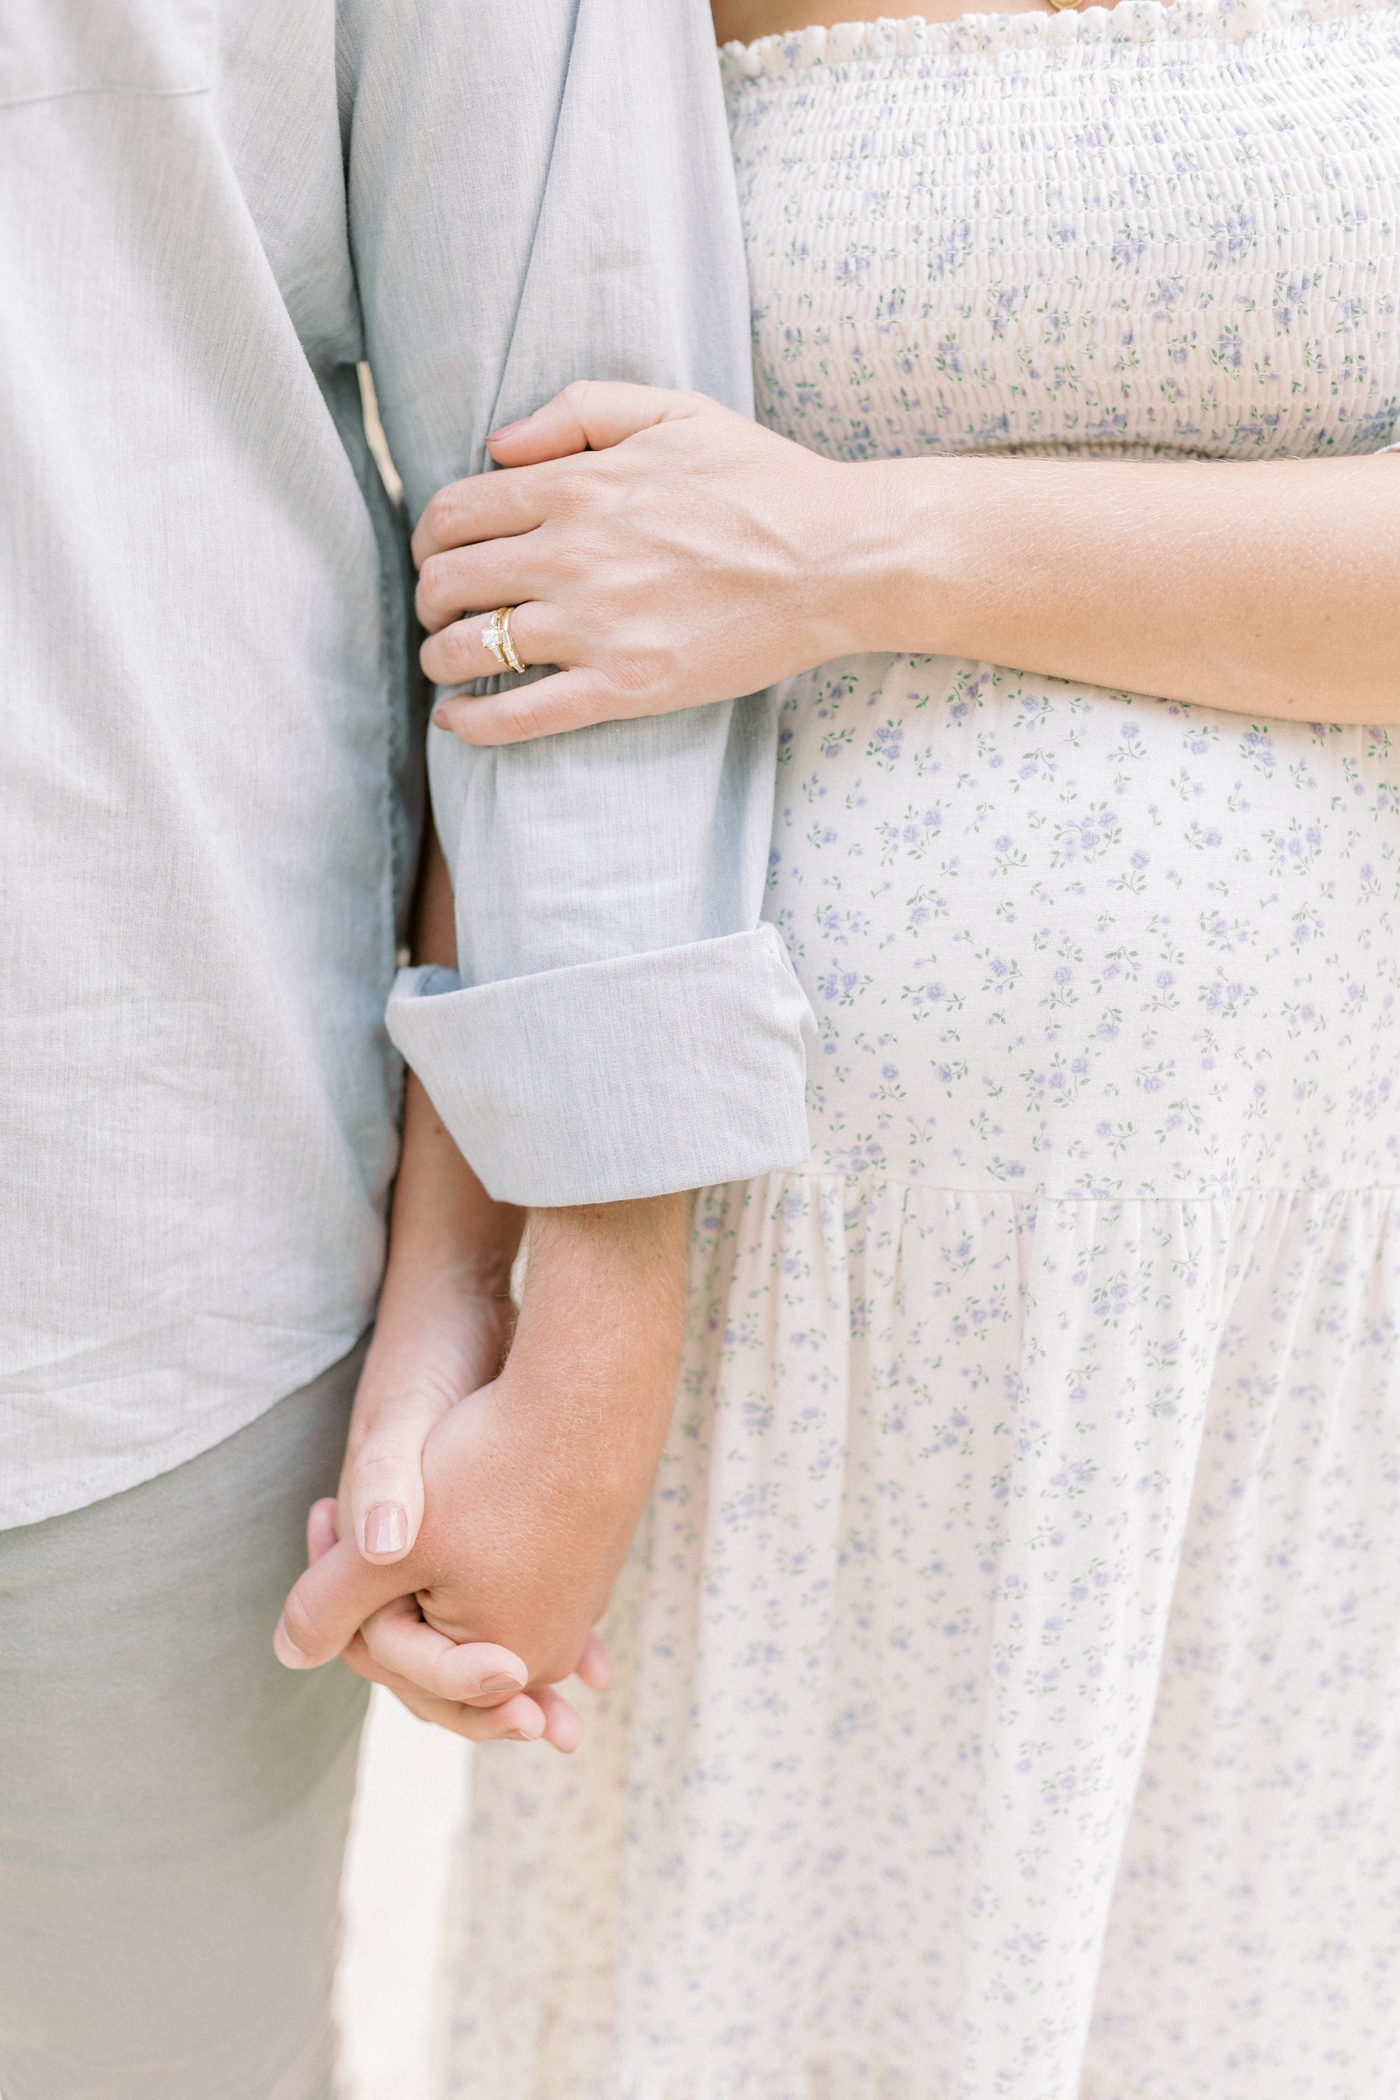 Detail photo of mom's ring holding dad's arm | Photo by Caitlyn Motycka Photography.